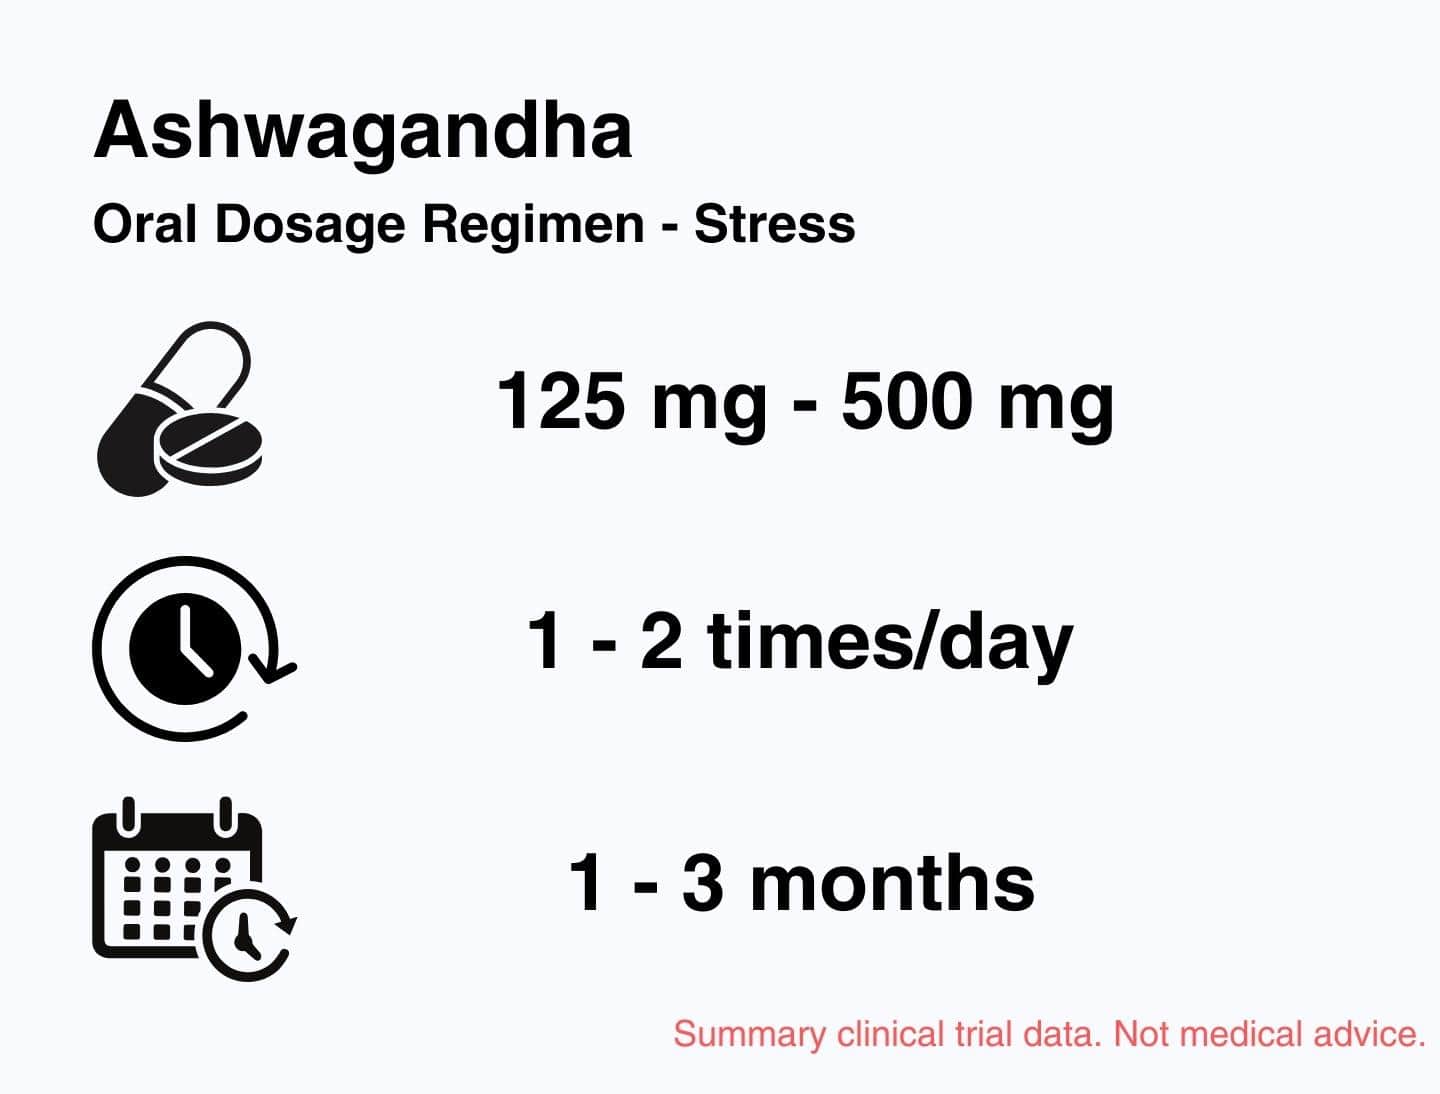 This image shows that The ashwagandha dose for used for stress in clinical trials was 125 mg – 500 mg, taken 1–2 times a day, for 1–3 months.